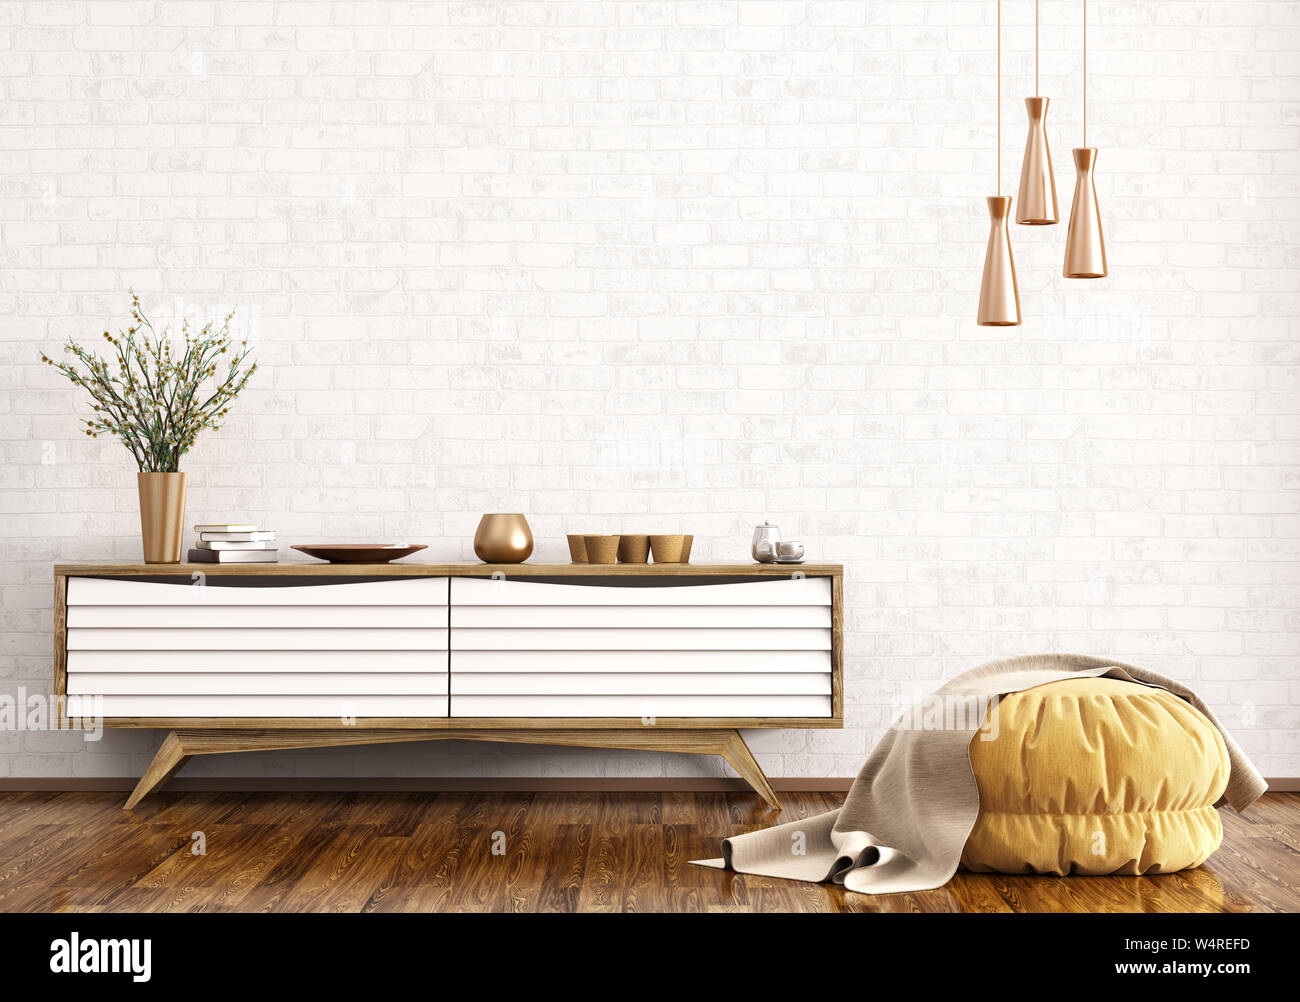 Modern interior of living room with wooden dresser and ottoman over brick wall 3d rendering Stock Photo